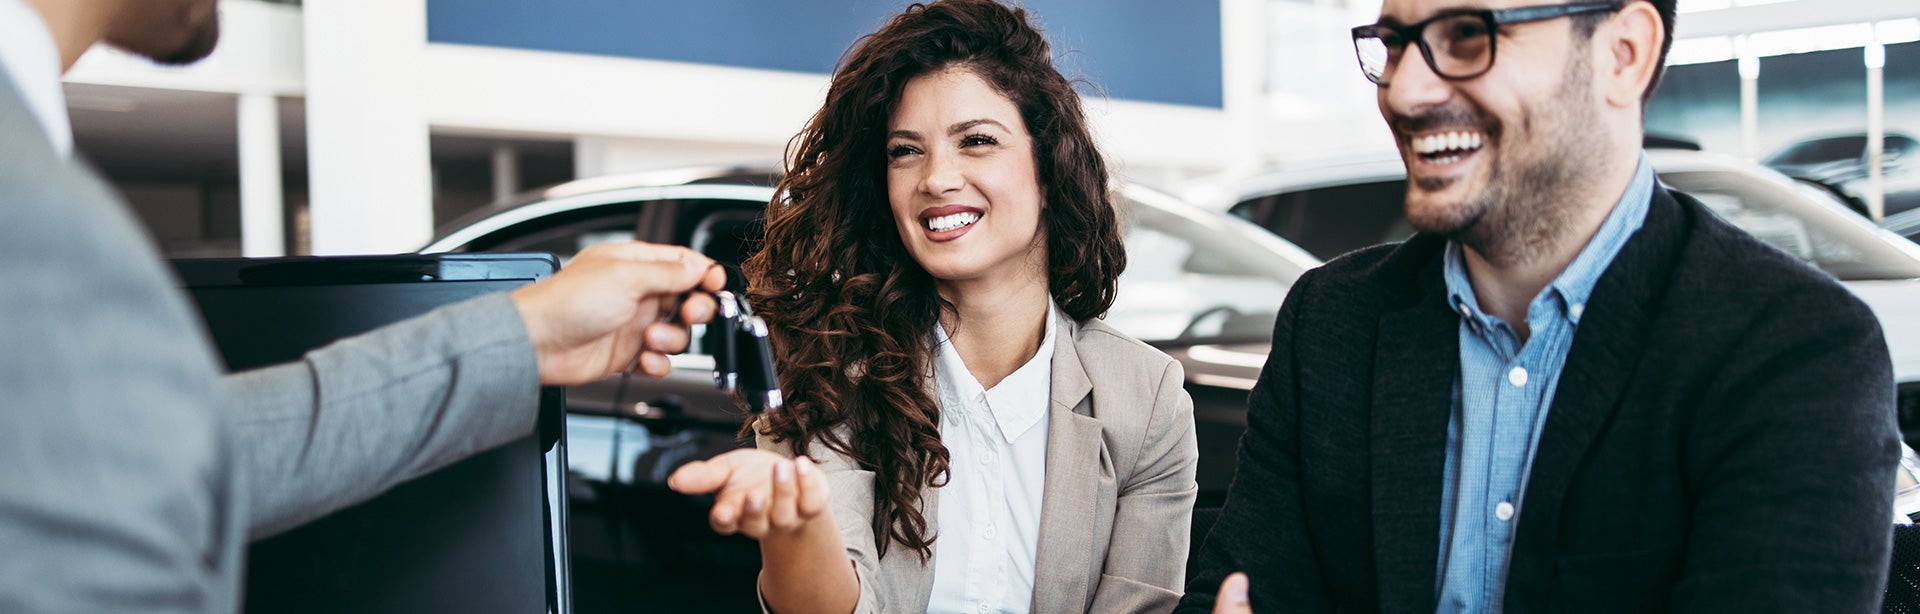 Why Buy a Used Car From Thompsons Toyota of Placerville?